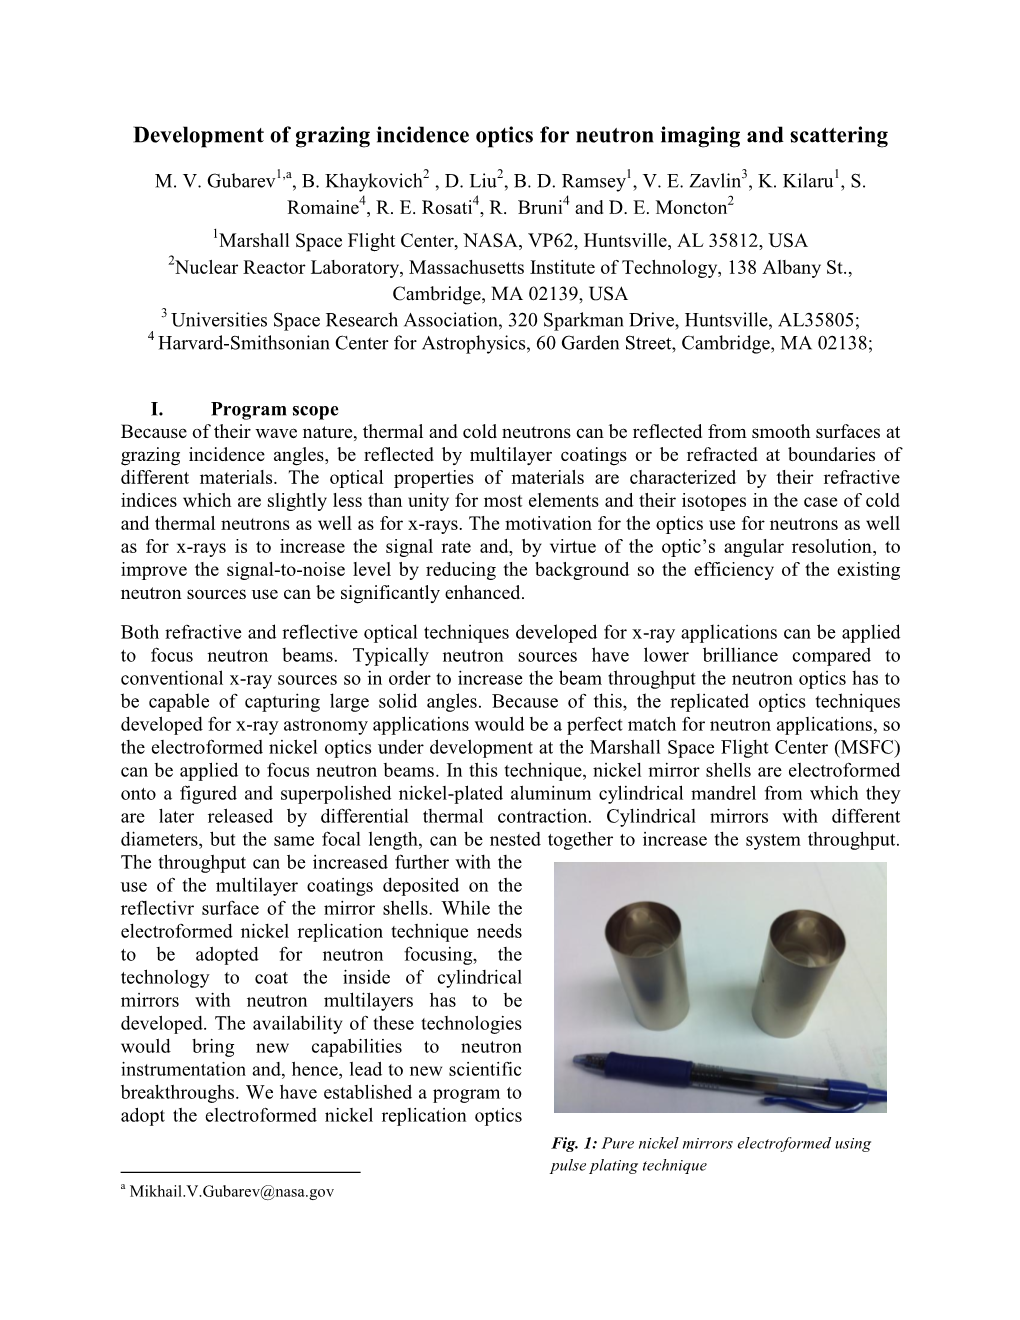 Development of Grazing Incidence Optics for Neutron Imaging and Scattering